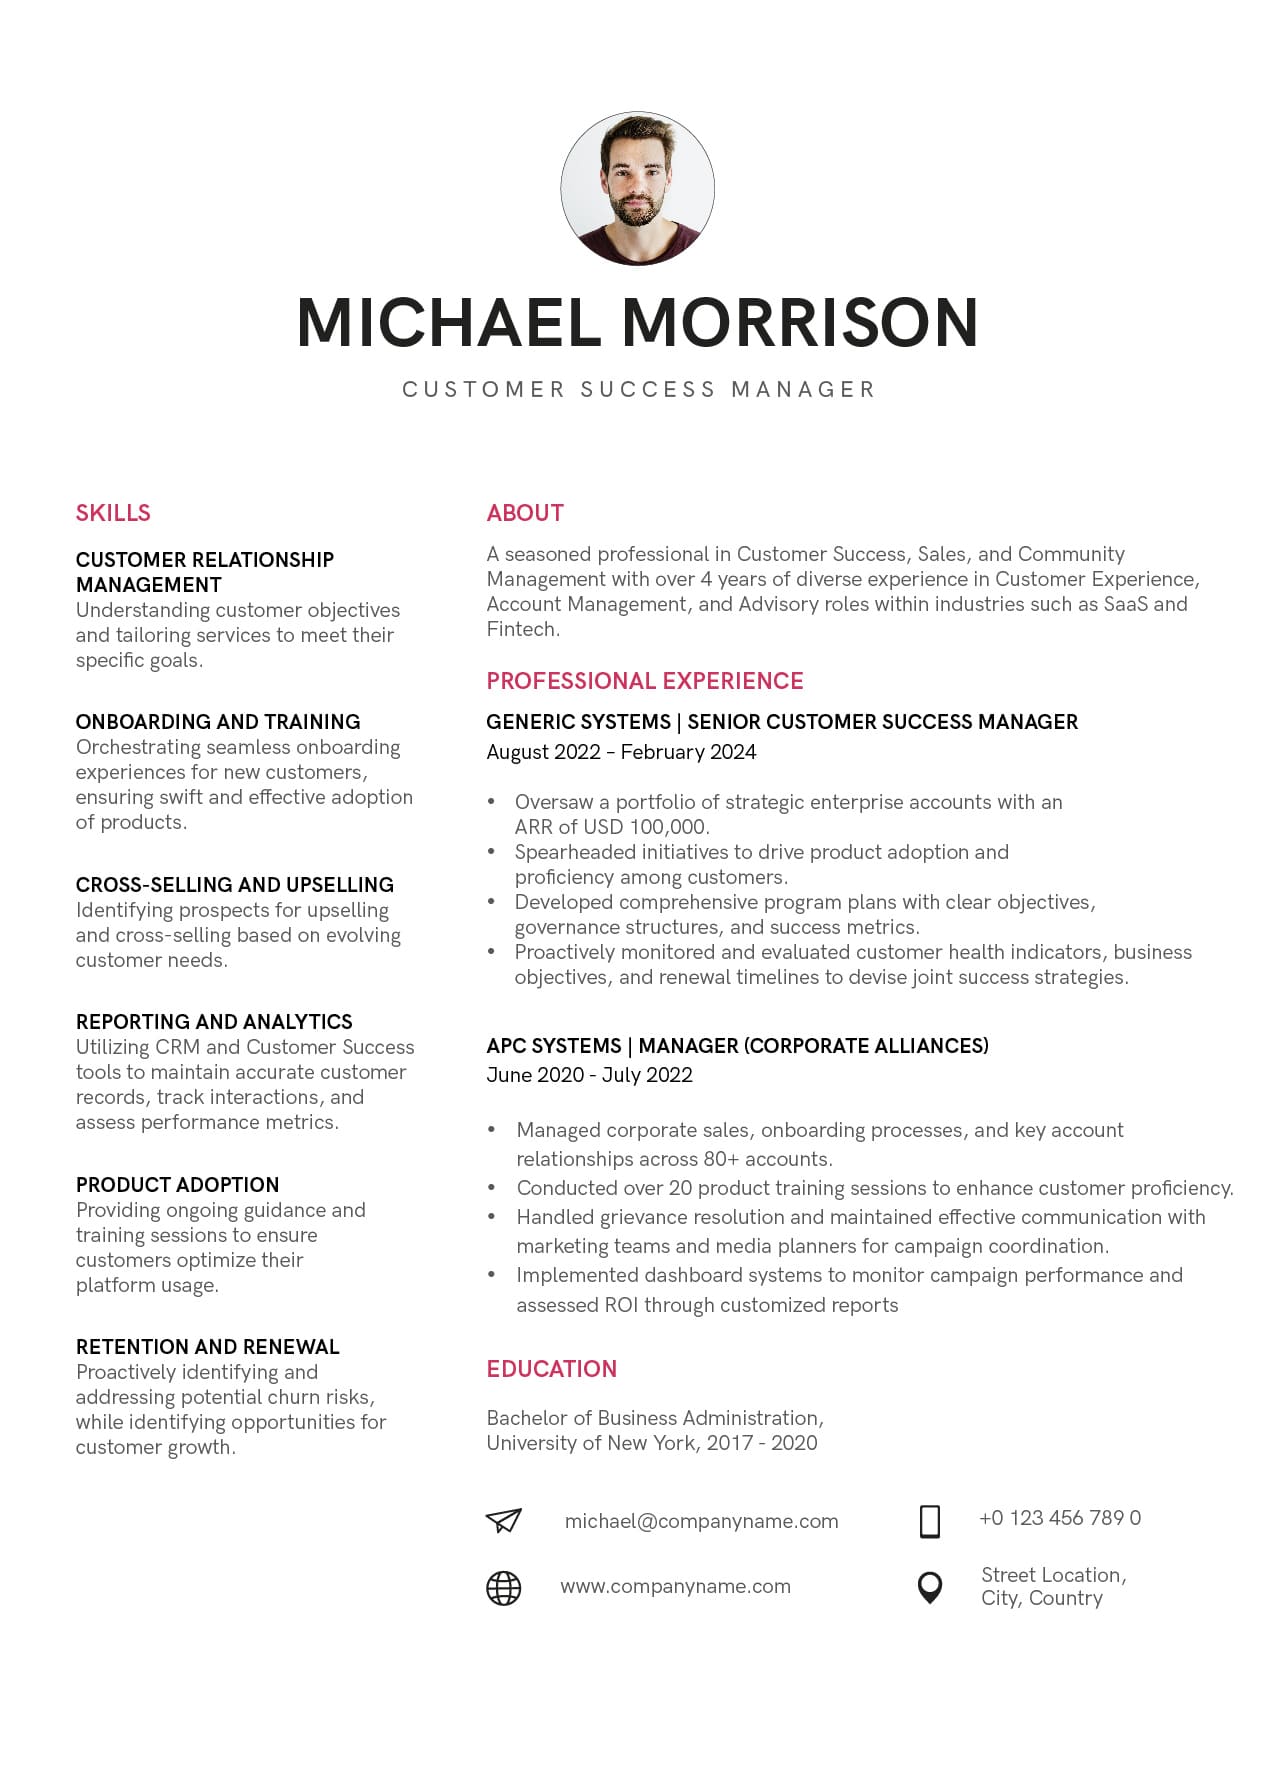 Customer Success Manager Resume by ZapScale